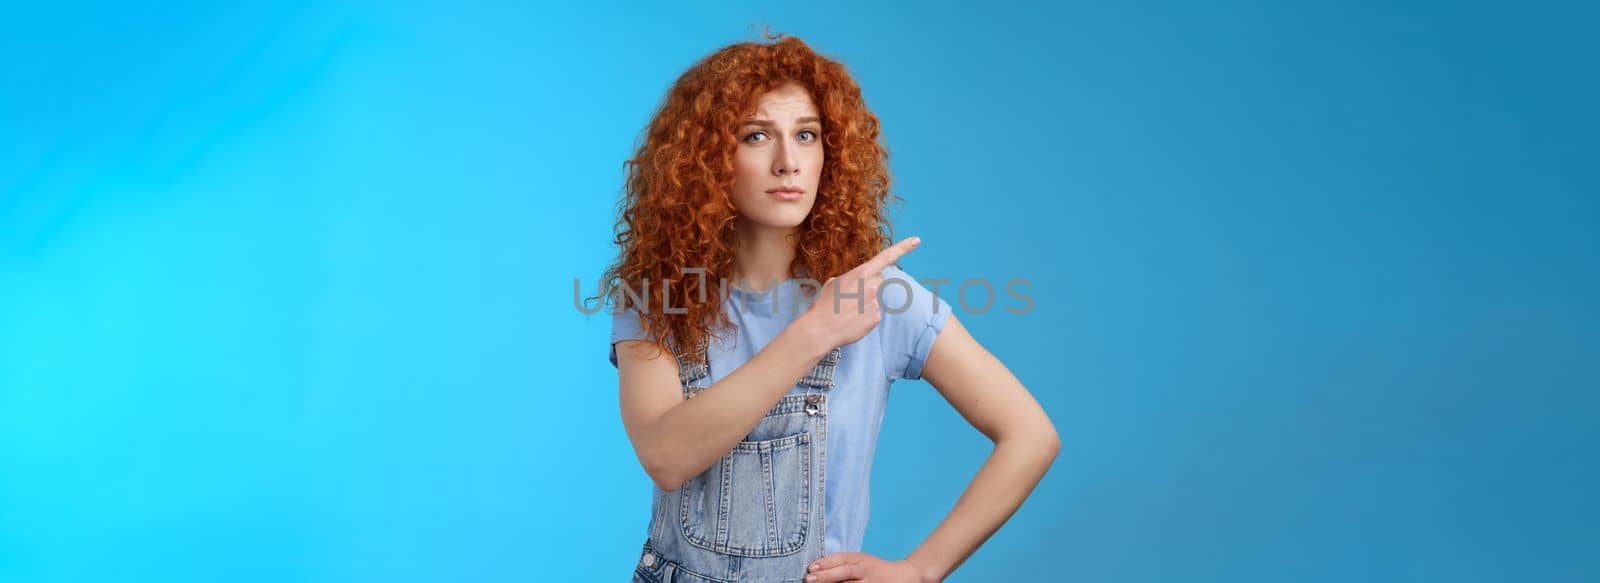 Lifestyle. Unsure silly timid hesitant cute redhead curly-haired ginger girl frowning uncertain asking your opinion questioned look camera pointing upper left corner confused worried blue background.